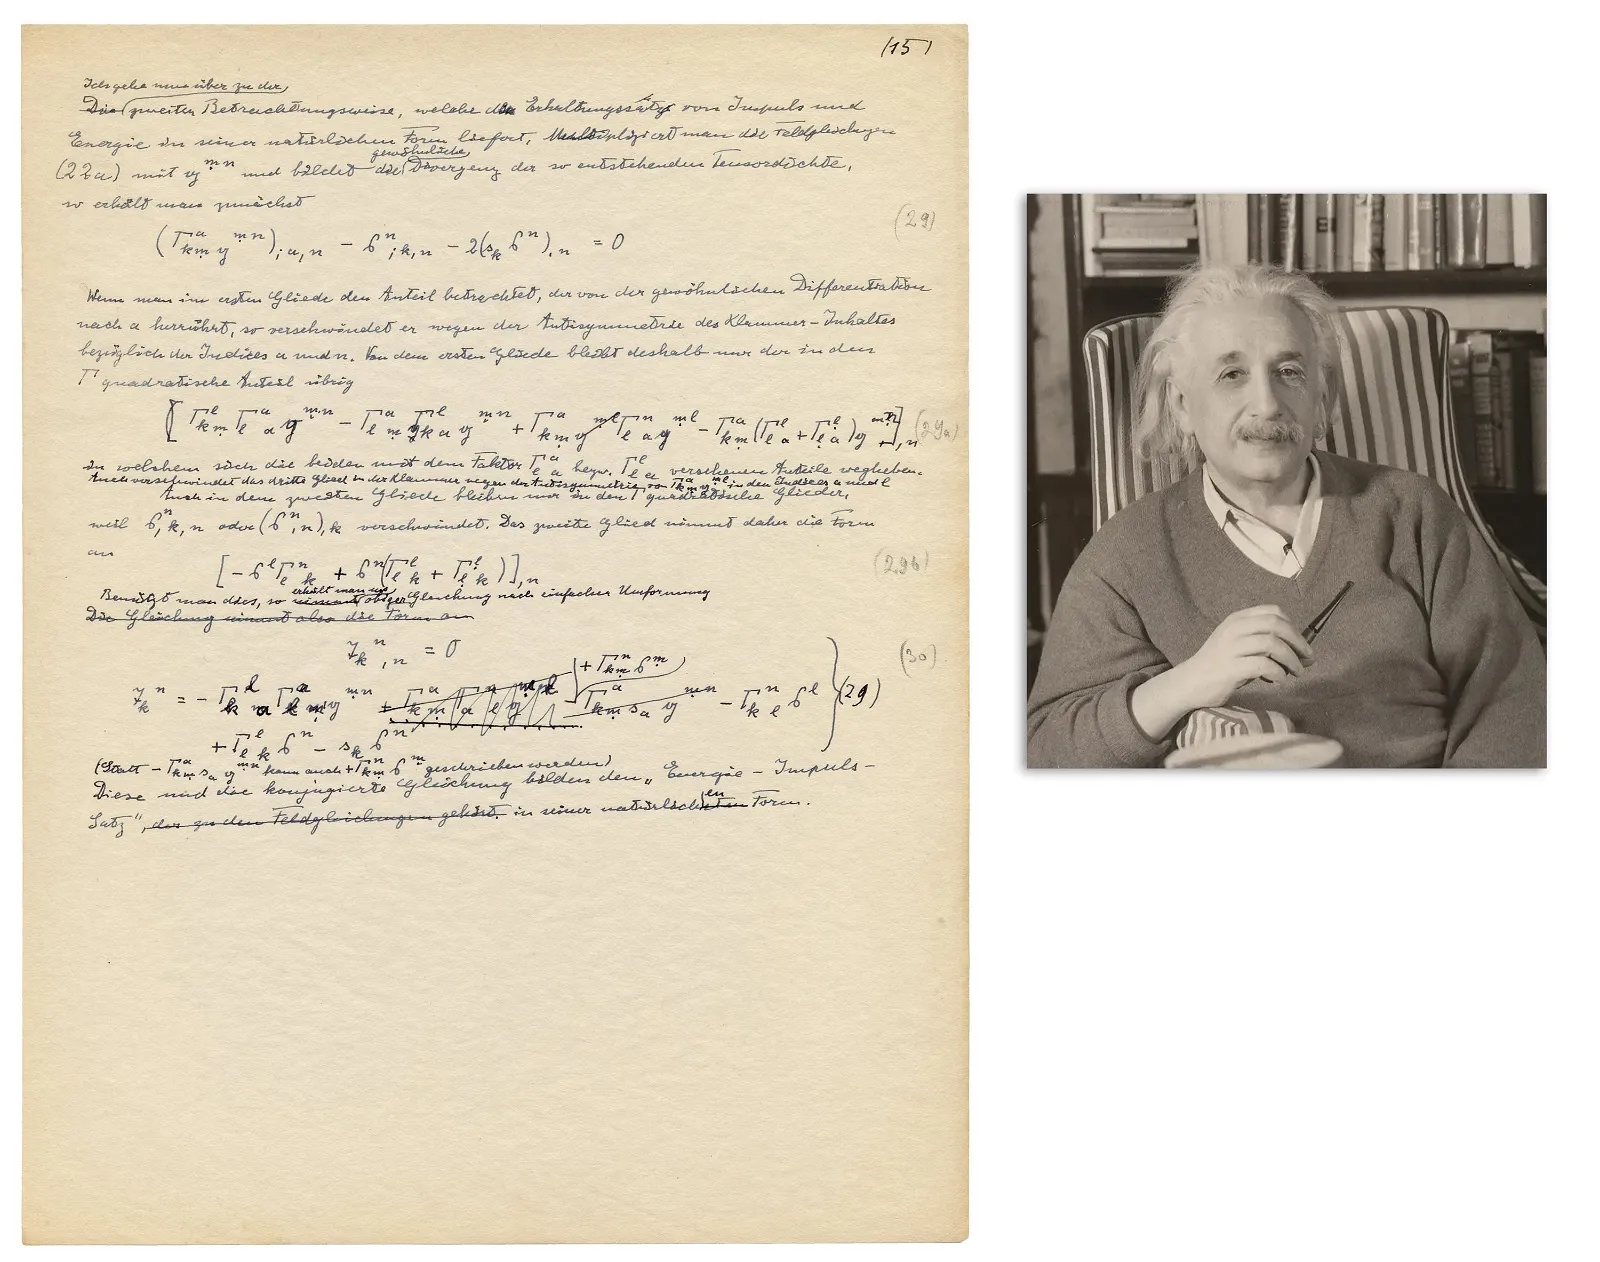 Albert Einstein Unified Field Theory autographed manuscript, estimated at $30,000-$40,000 at University Archives.